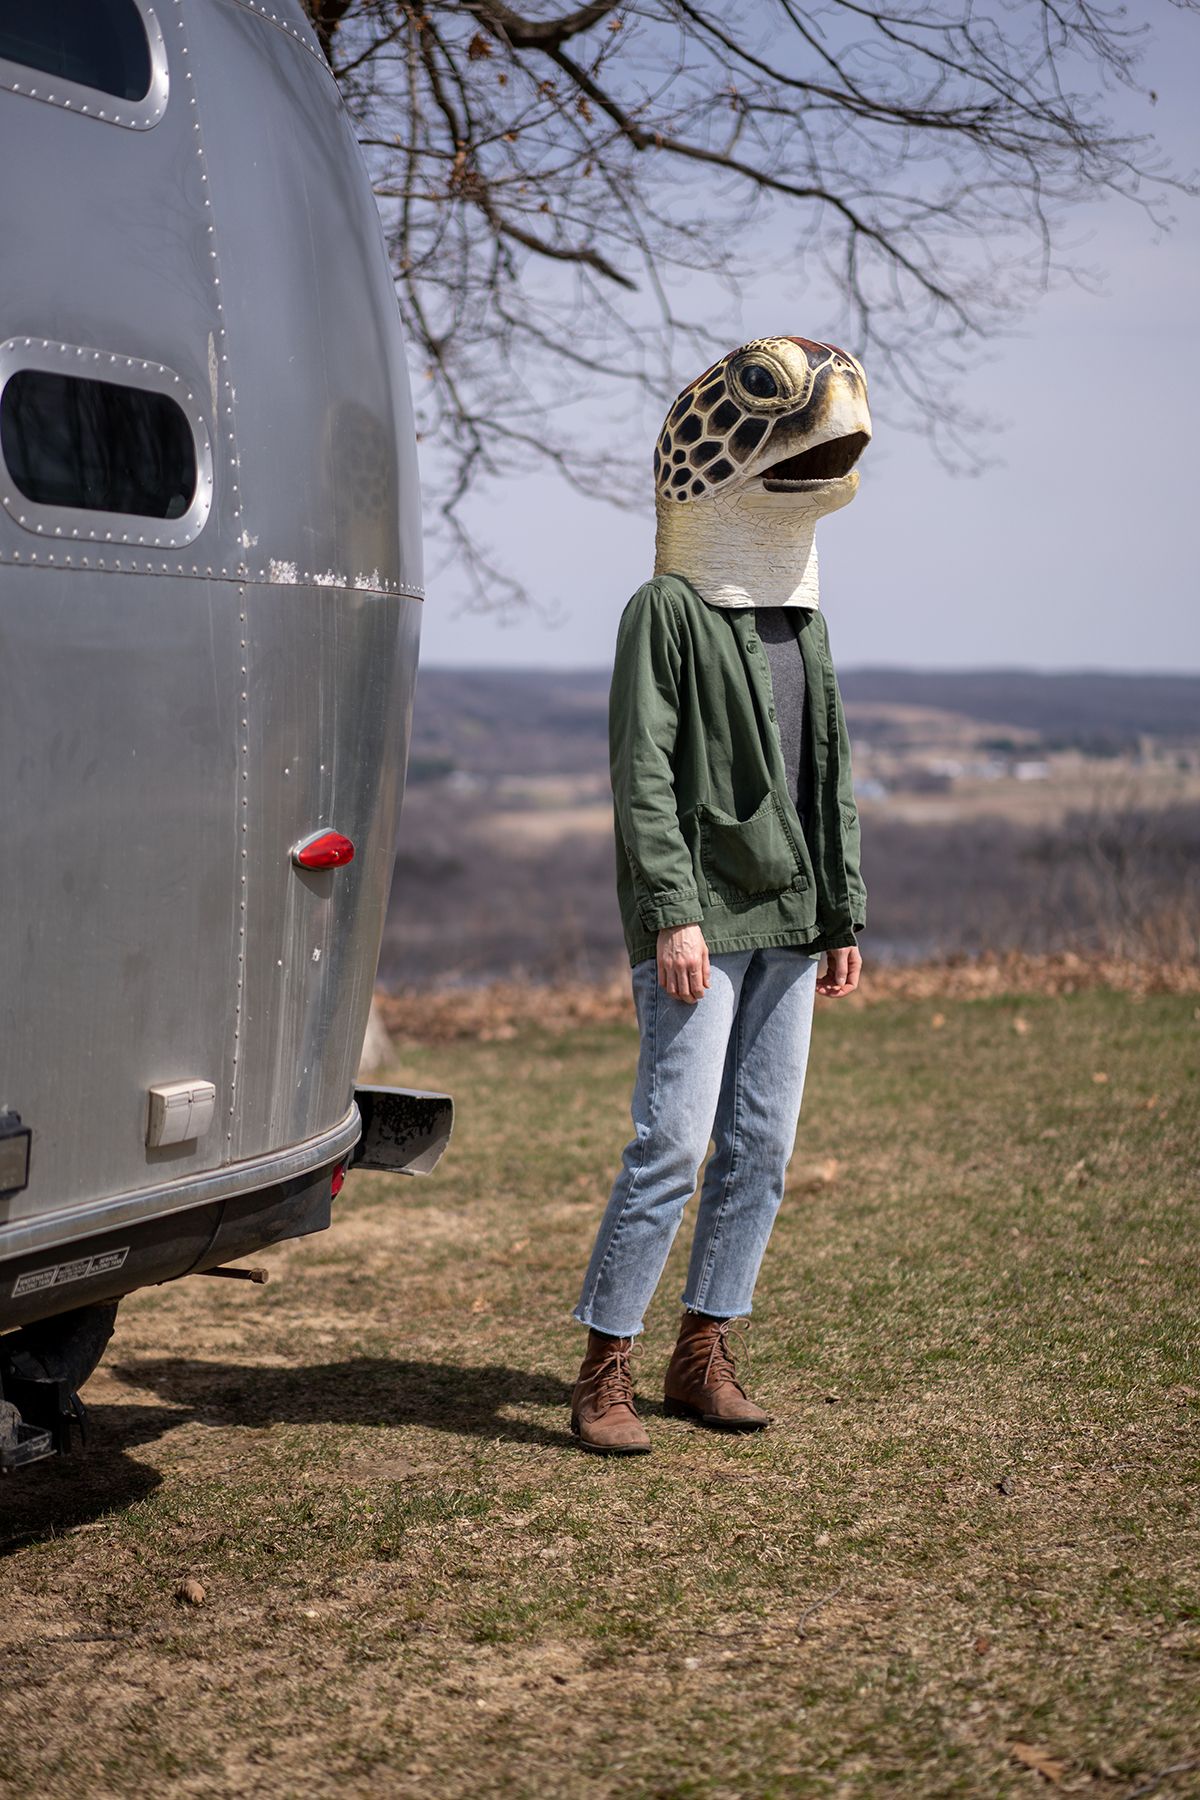 A photo of a person in a green jacket and blue jeans standing next to a silver trailer while wearing a sea turtle head over their head